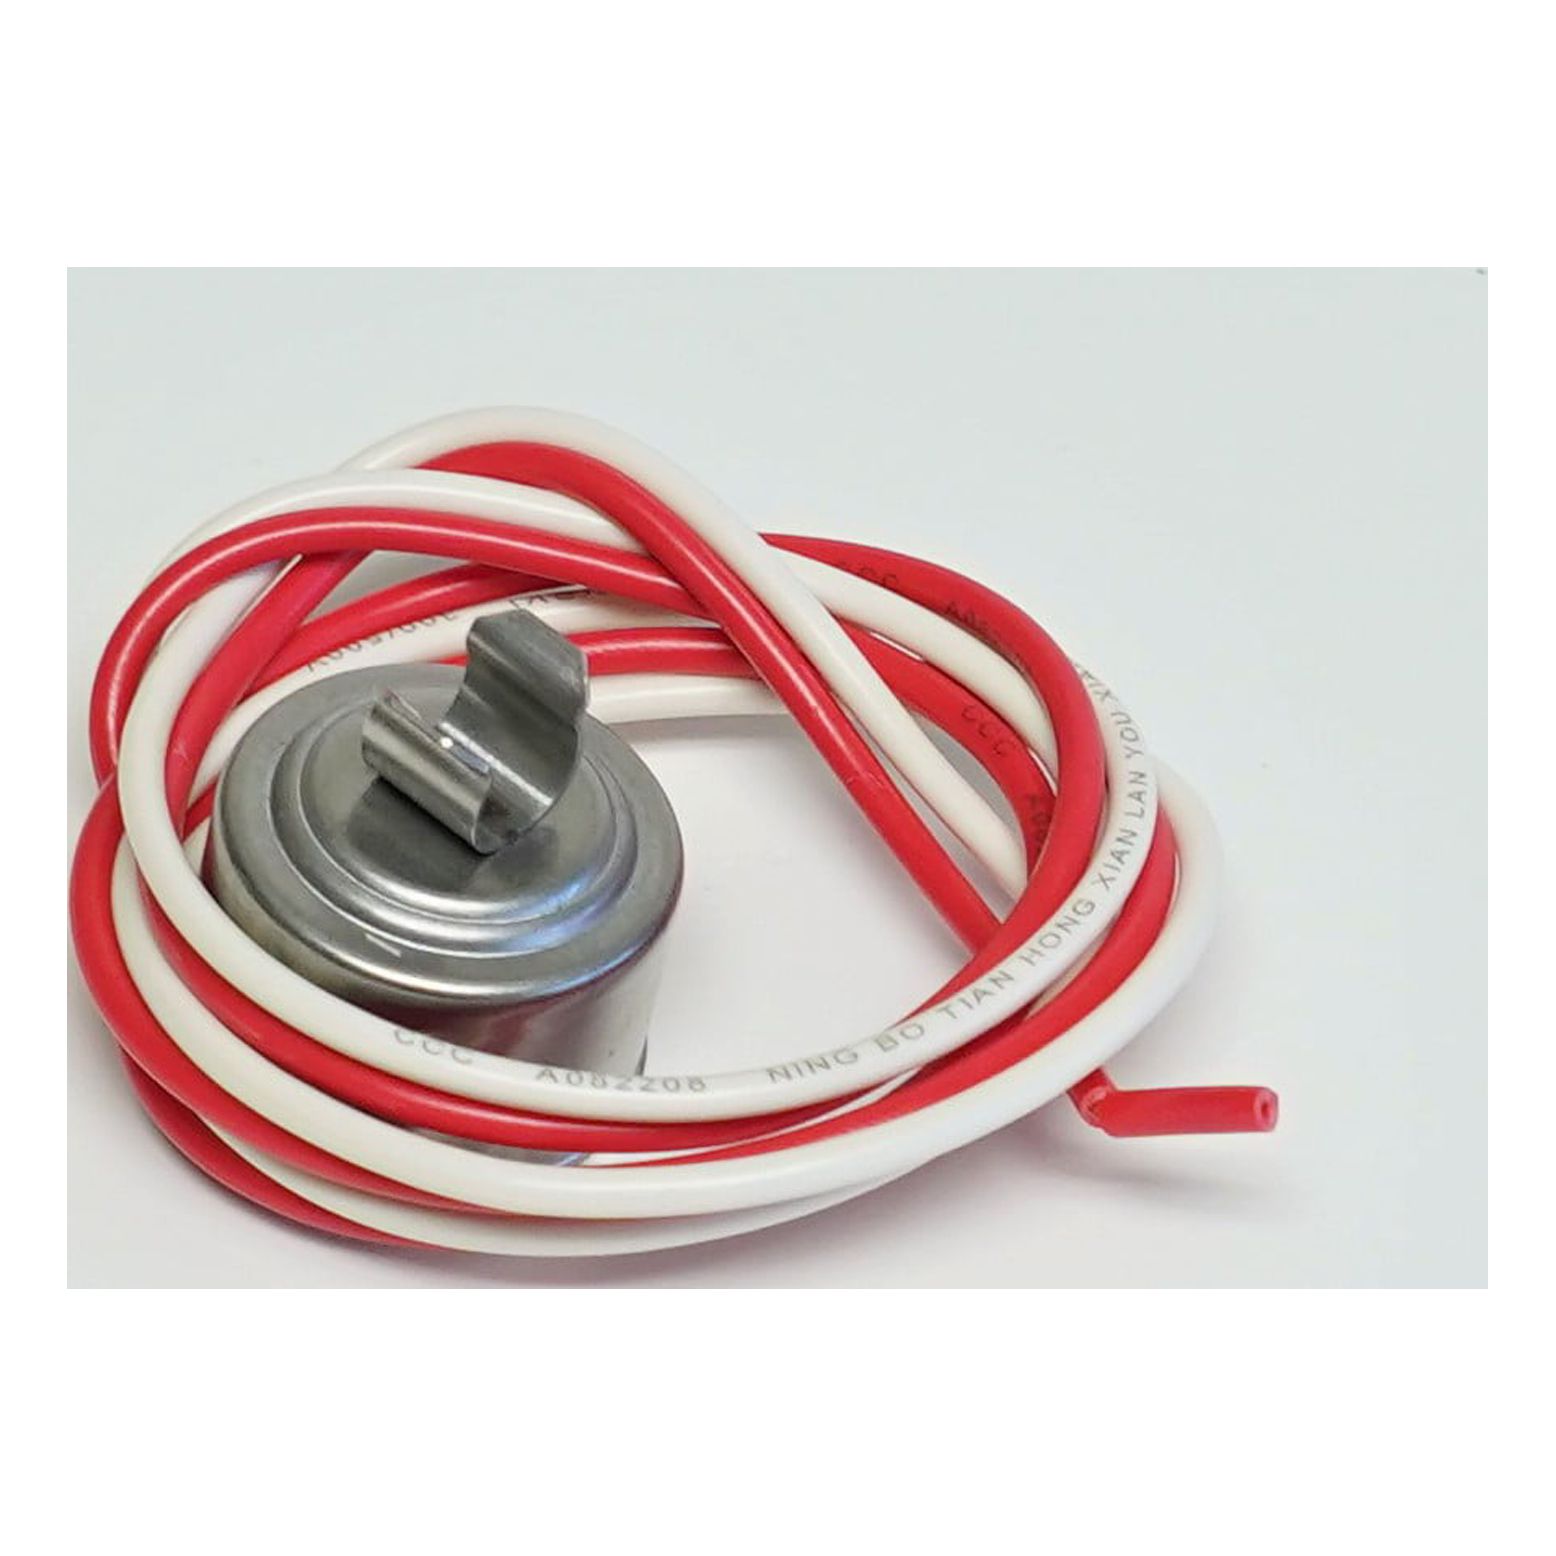 Supco SL7490 Refrigerator Defrost Thermostat for Whirlpool L48 WP4387490 AP3108445 PS371245 - image 1 of 2